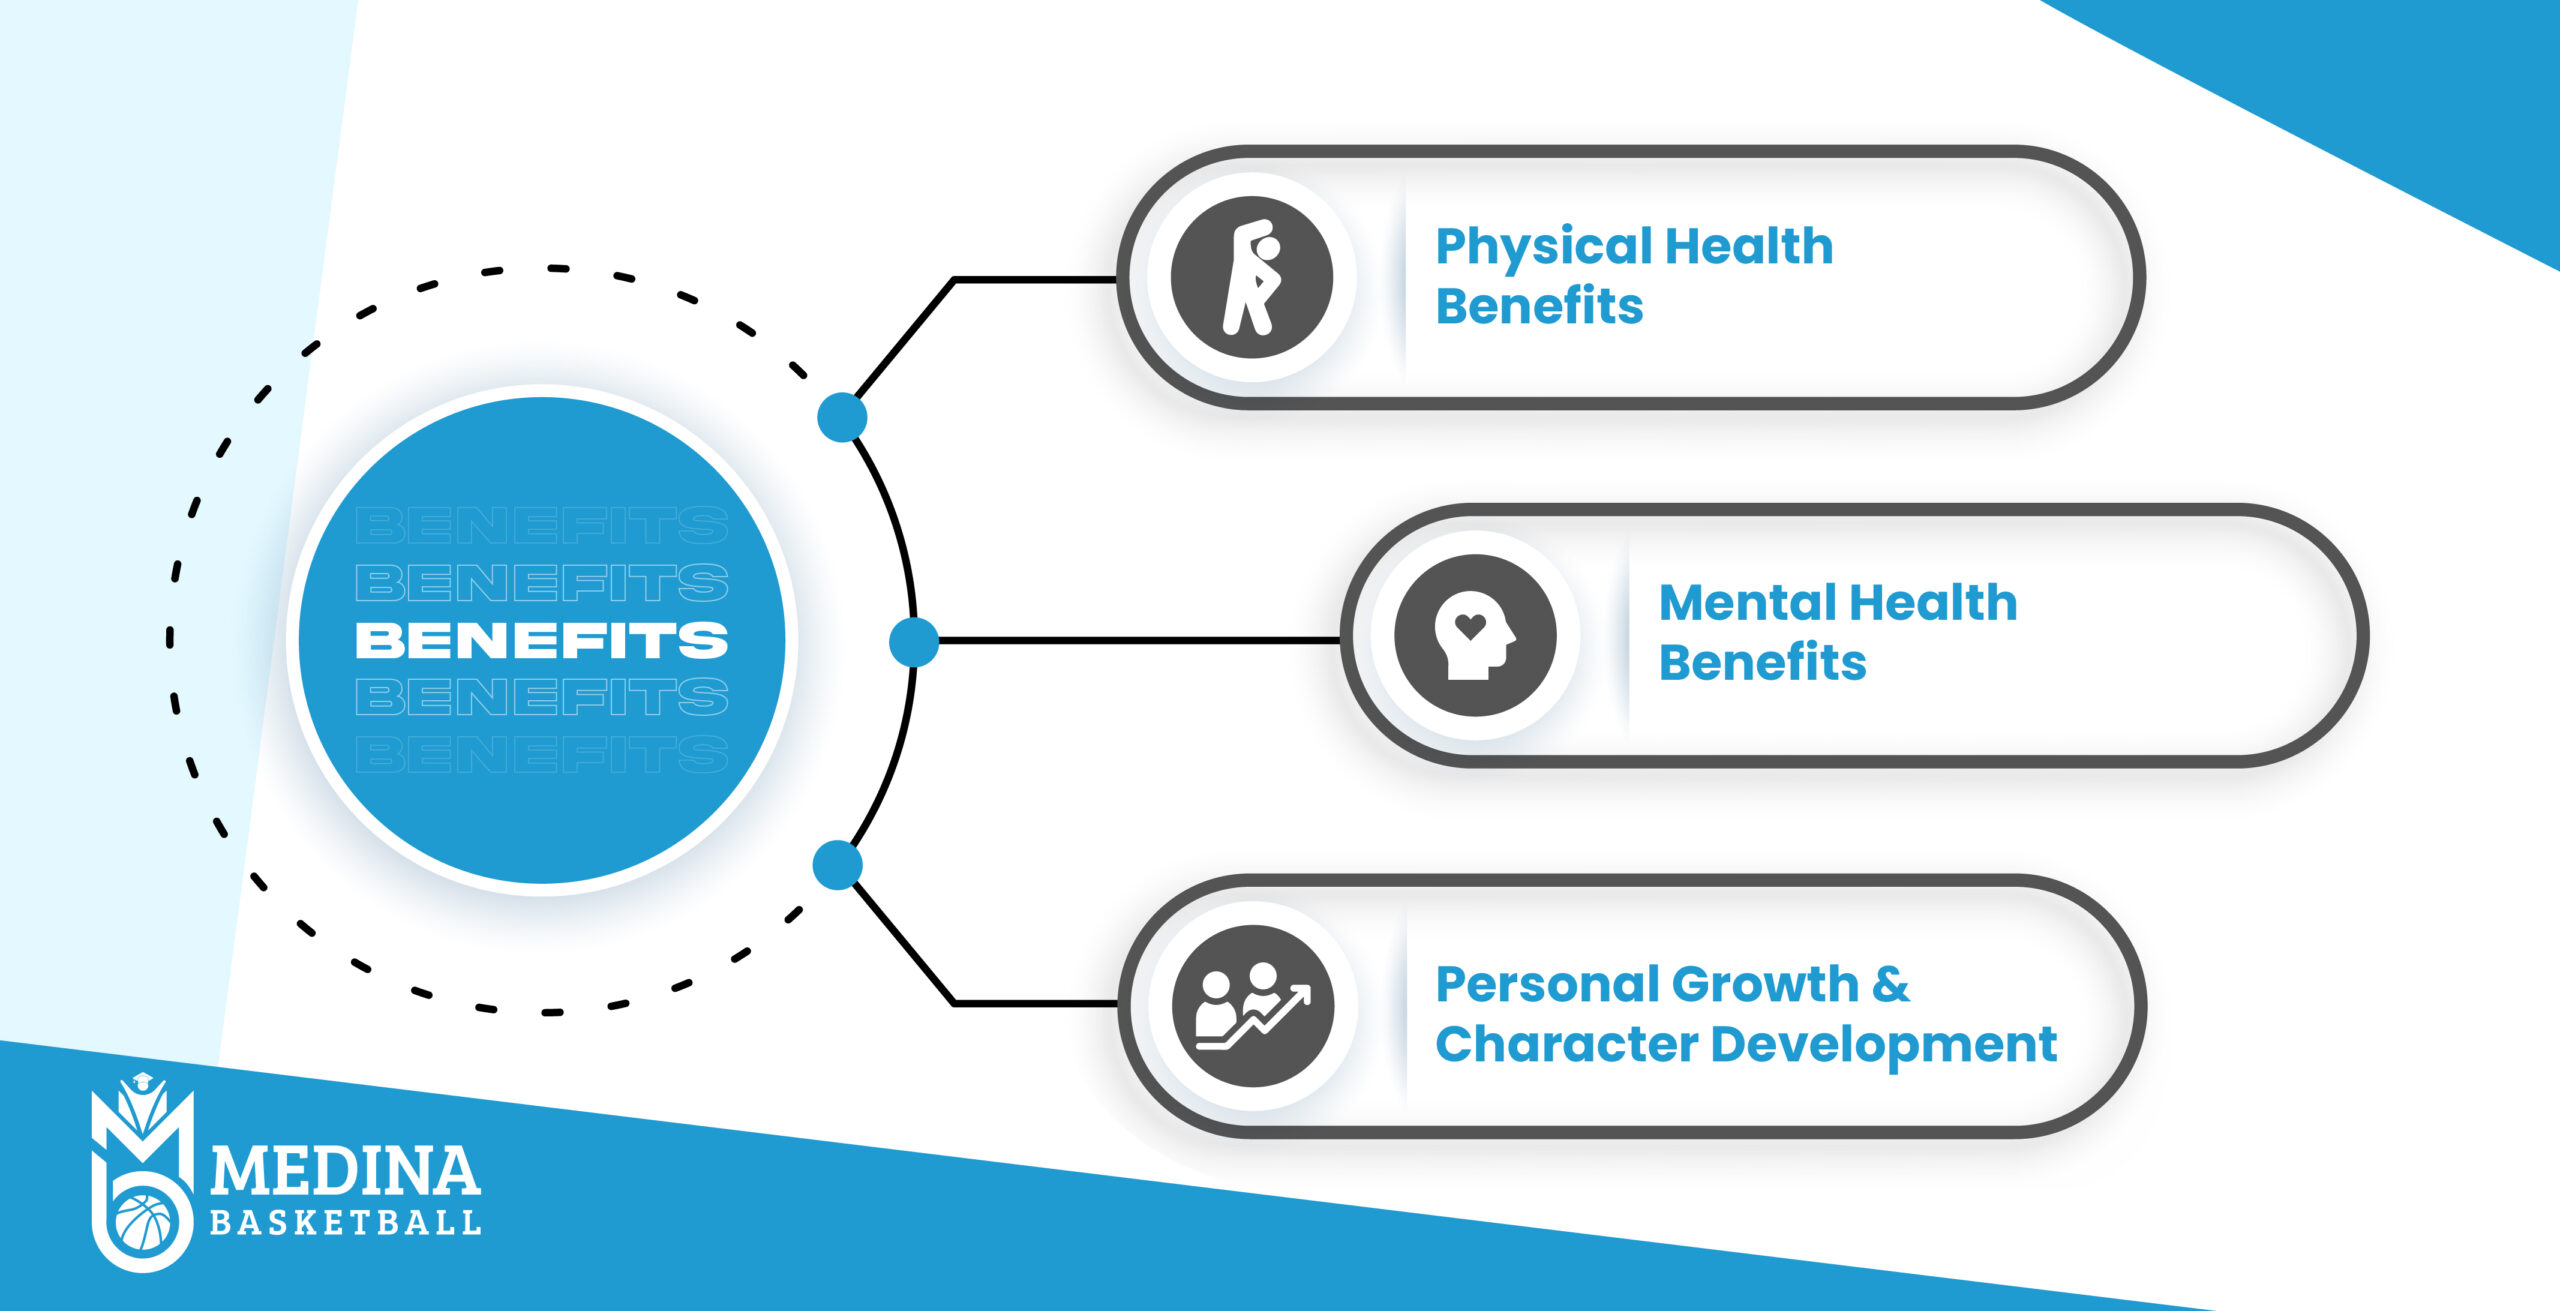 Physical Health Benefits 